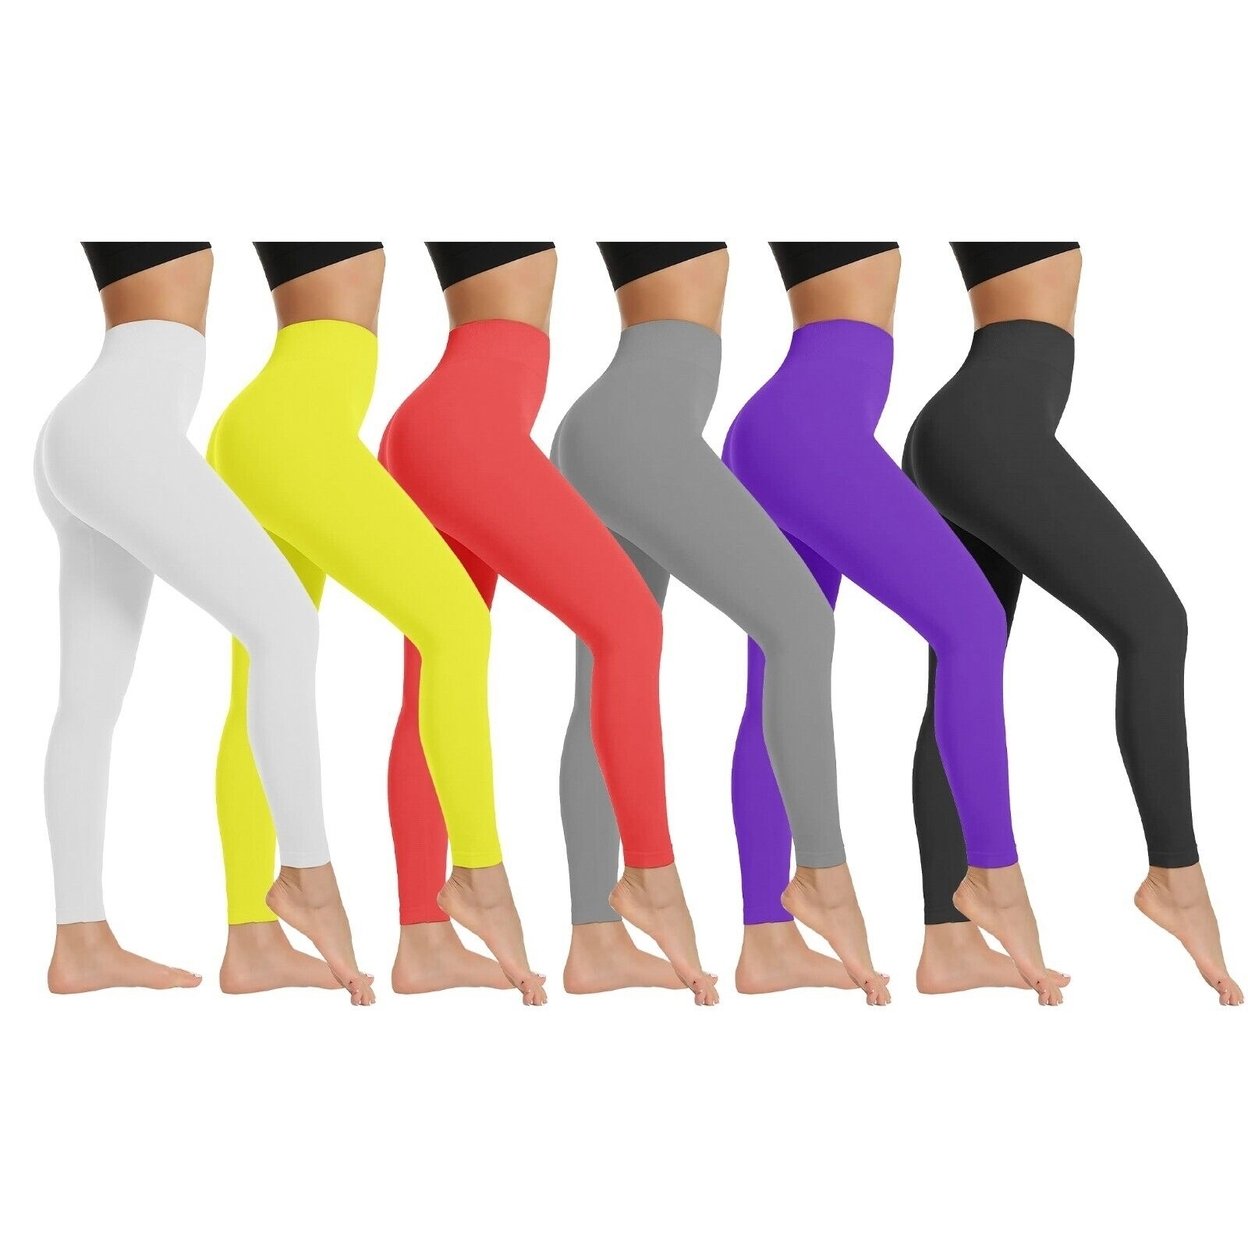 2-Pack: Women's High Waist Super Soft Active Athlete Stretch Yoga Cozy Leggings - Yellow & Red, Large